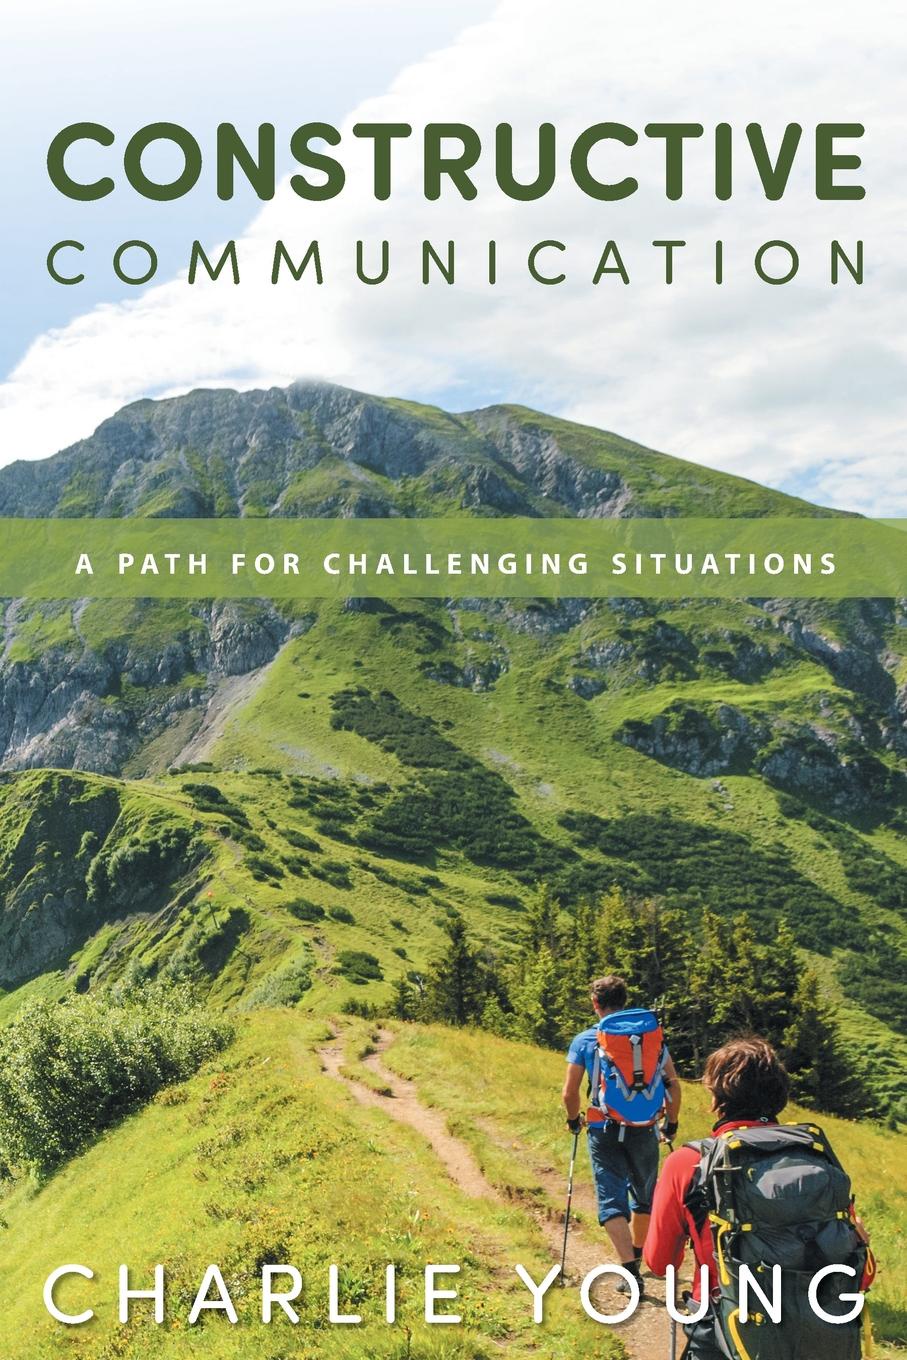 Constructive Communication. A Path for Challenging Situations